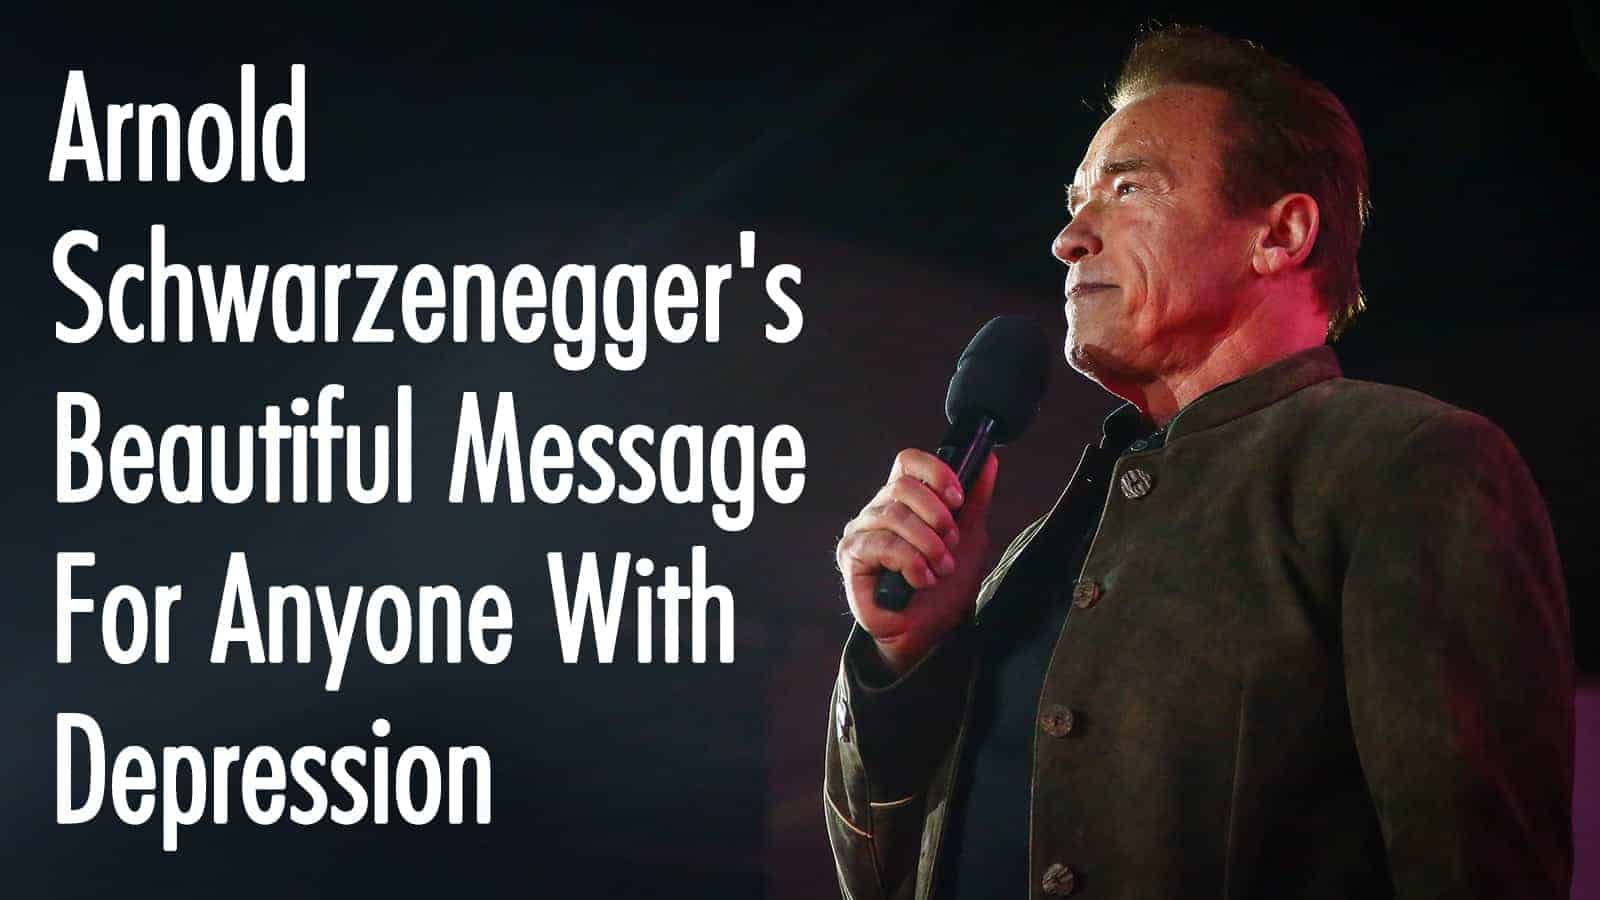 Arnold Schwarzenegger’s Beautiful Message For Anyone With Depression